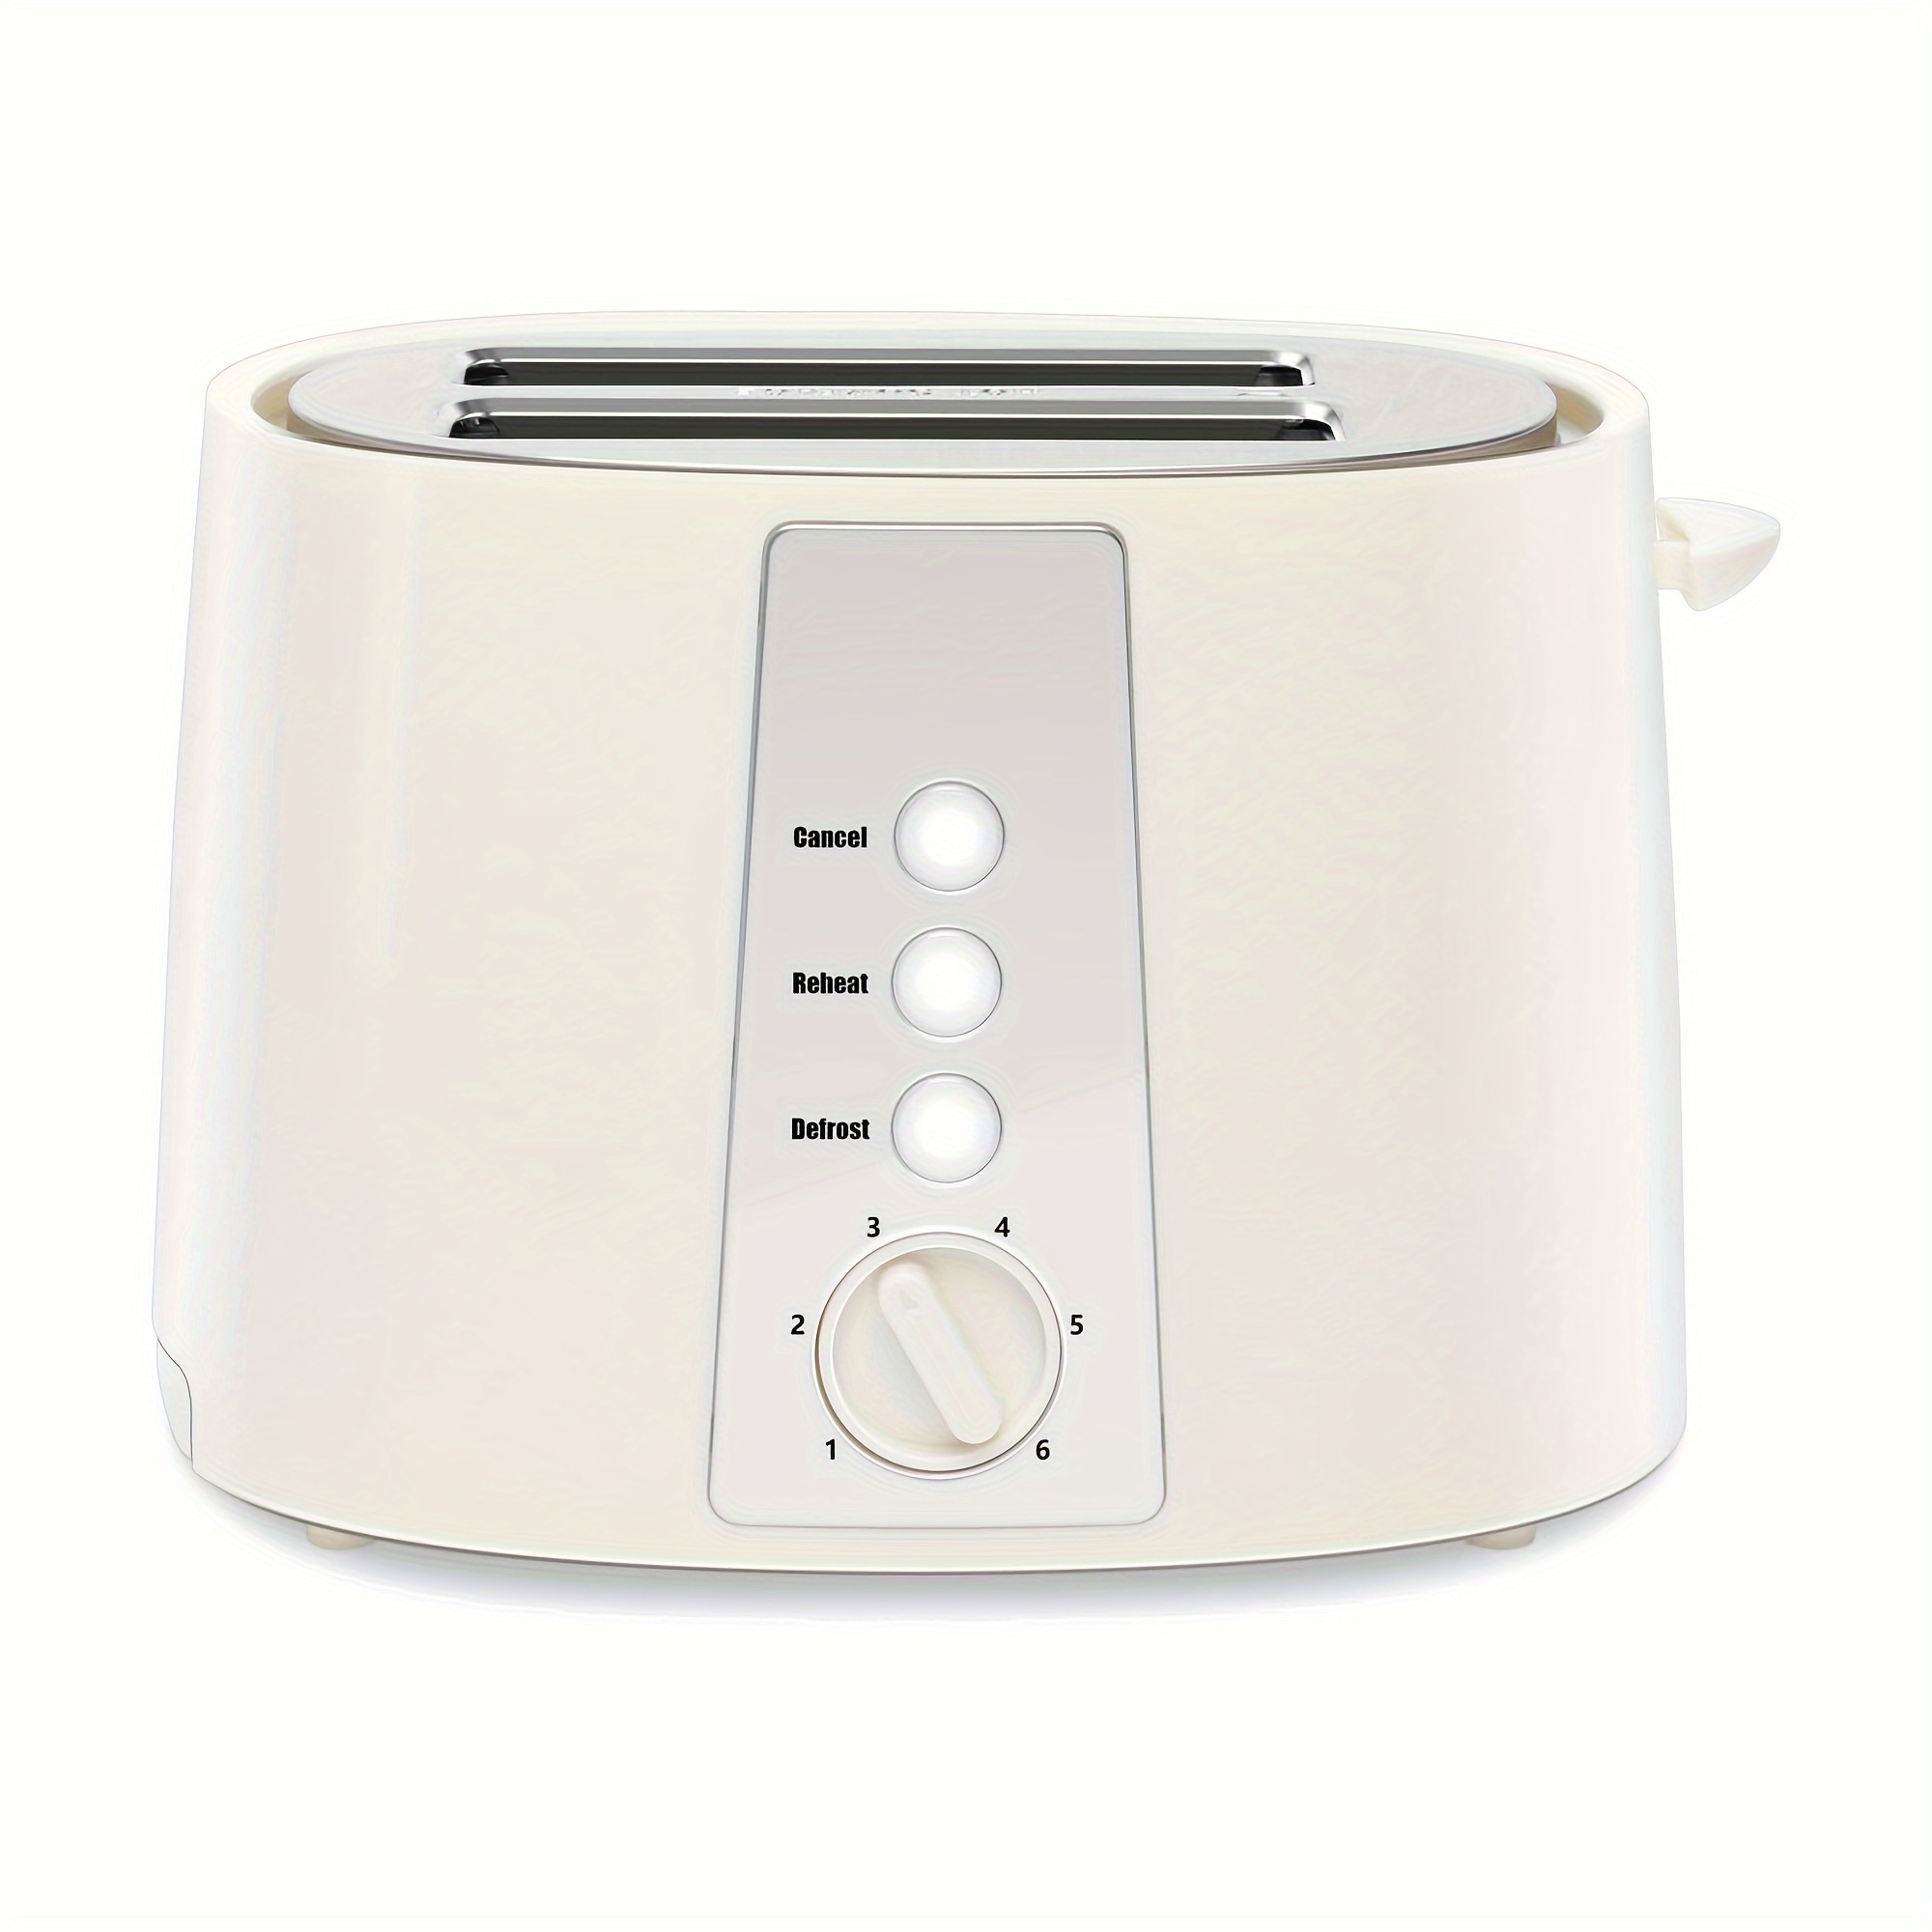 

Toaster 2 , Extra Wide Slot Toaster, 7 Shade Settings, Bread Toaster With Cancel, Defrost, Reheat Function, Extra Wide Slots For Waffle Or Bagel, Removable Crumb Tray, 750w